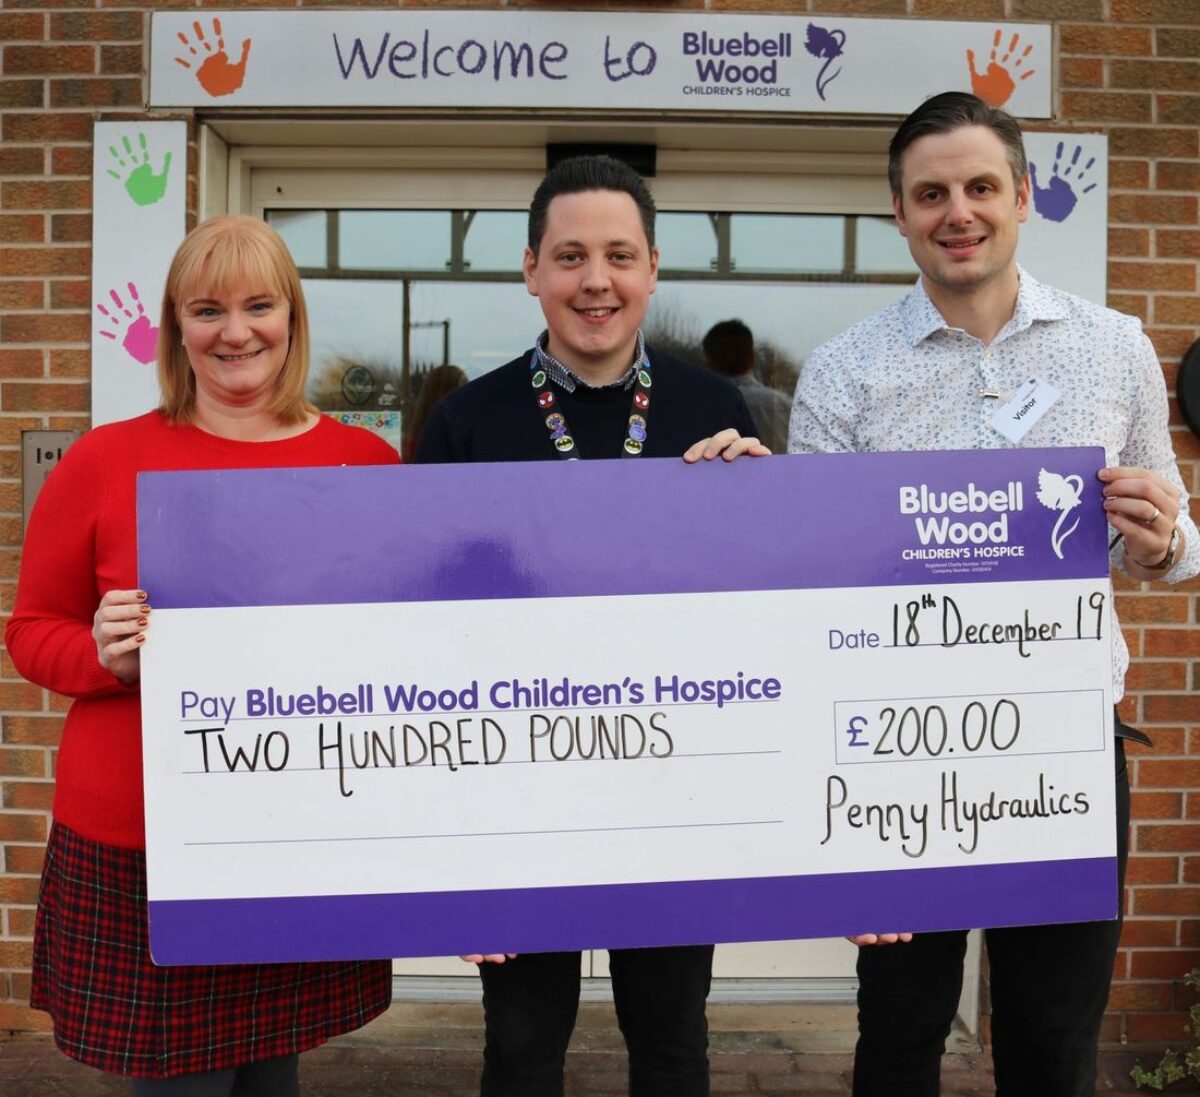 Penny Hydraulics Raise £200 for Bluebell Wood Children’s Hospice - Penny Hydraulics Ltd